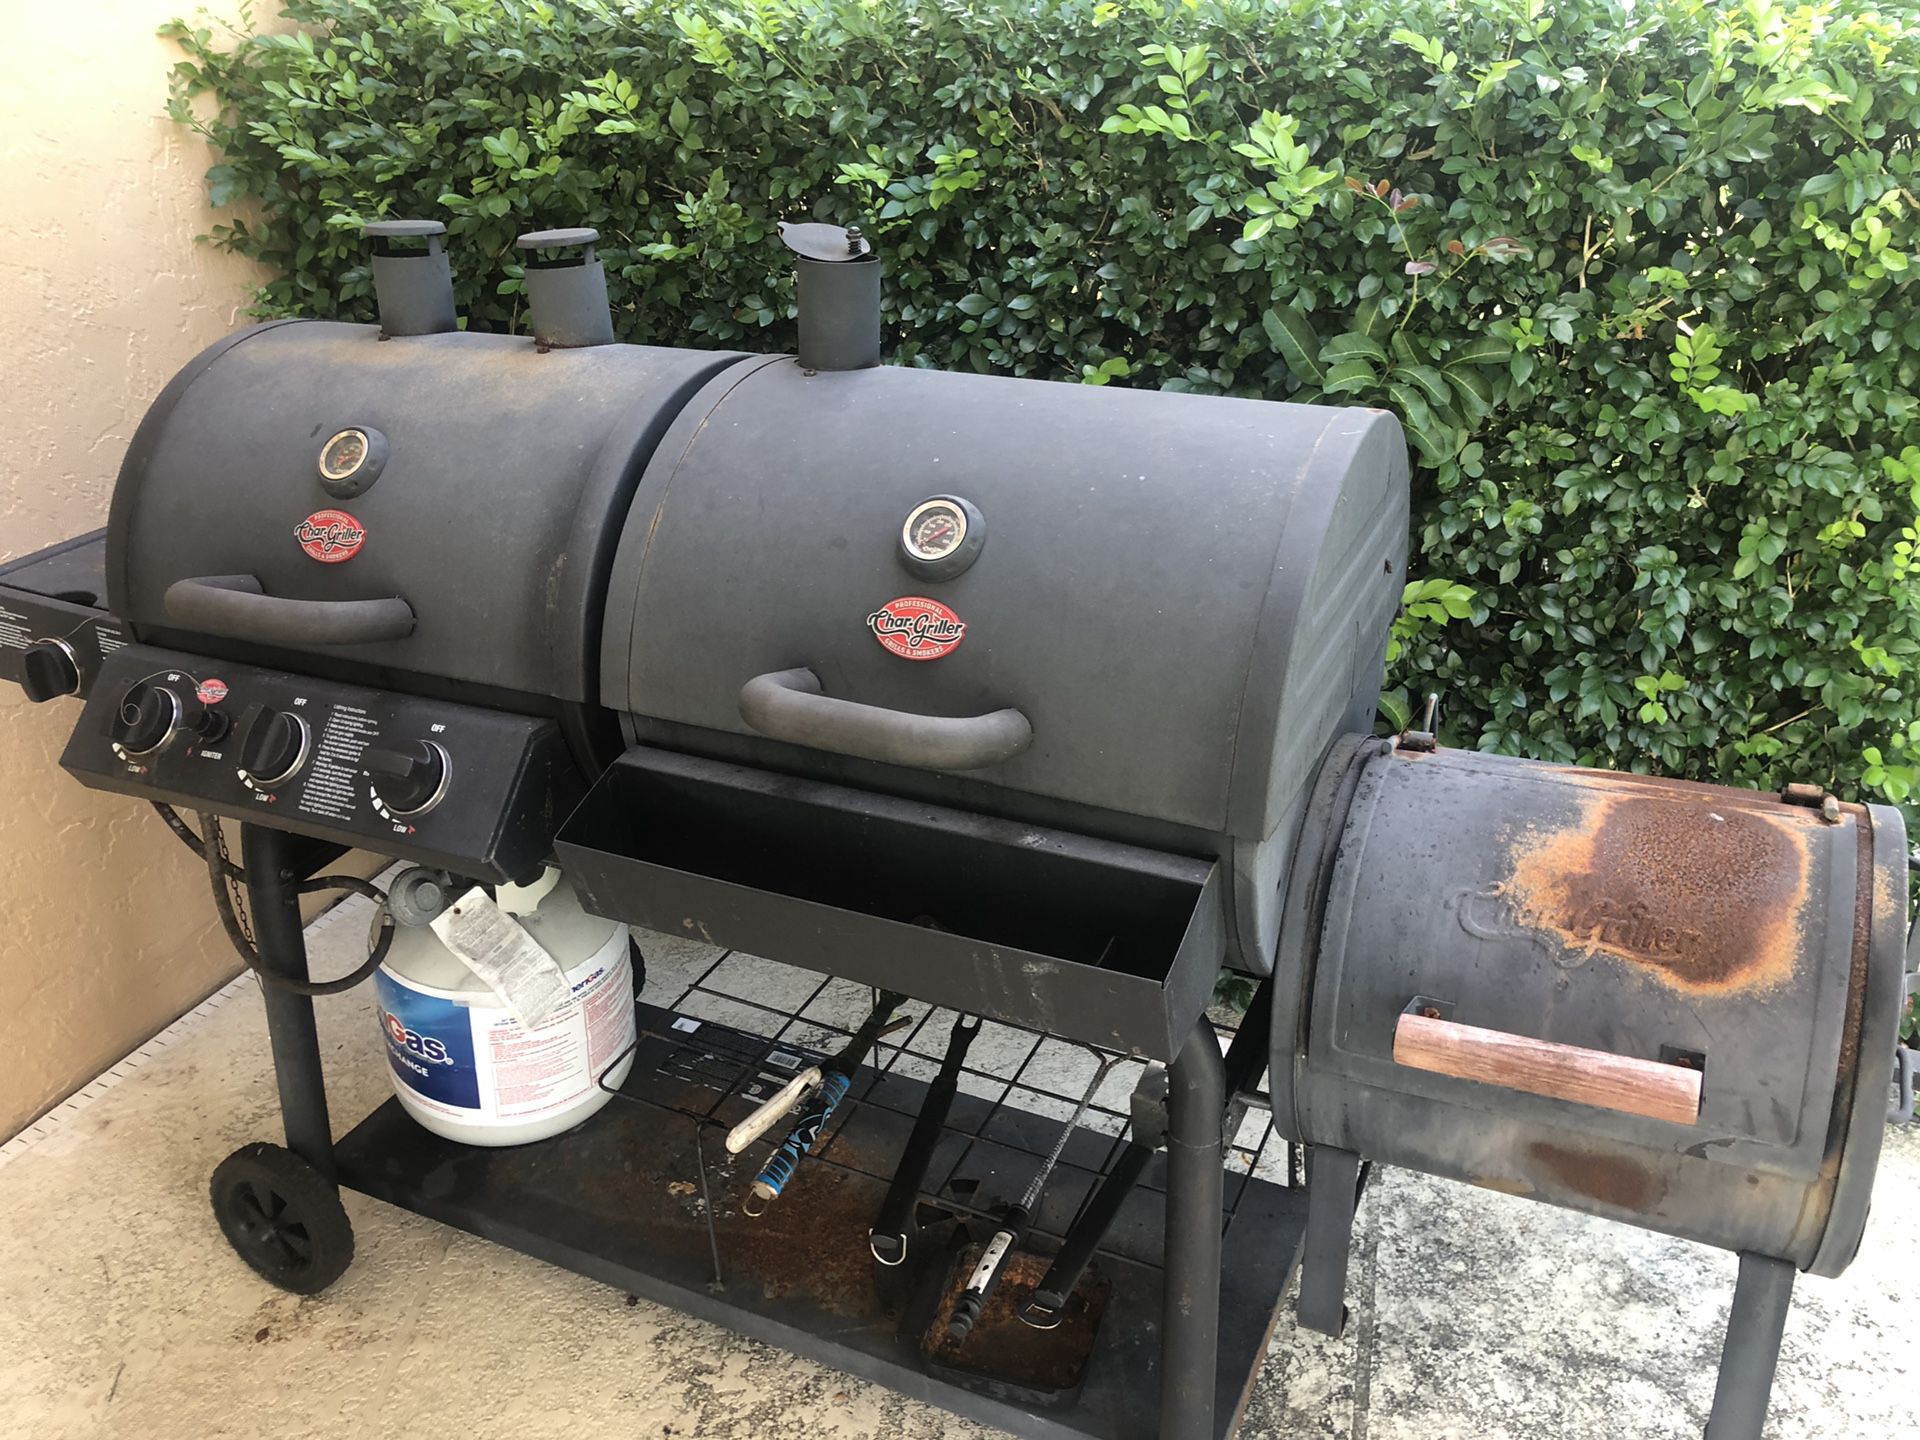 4 year old grill with side smoker/charcoal & gas